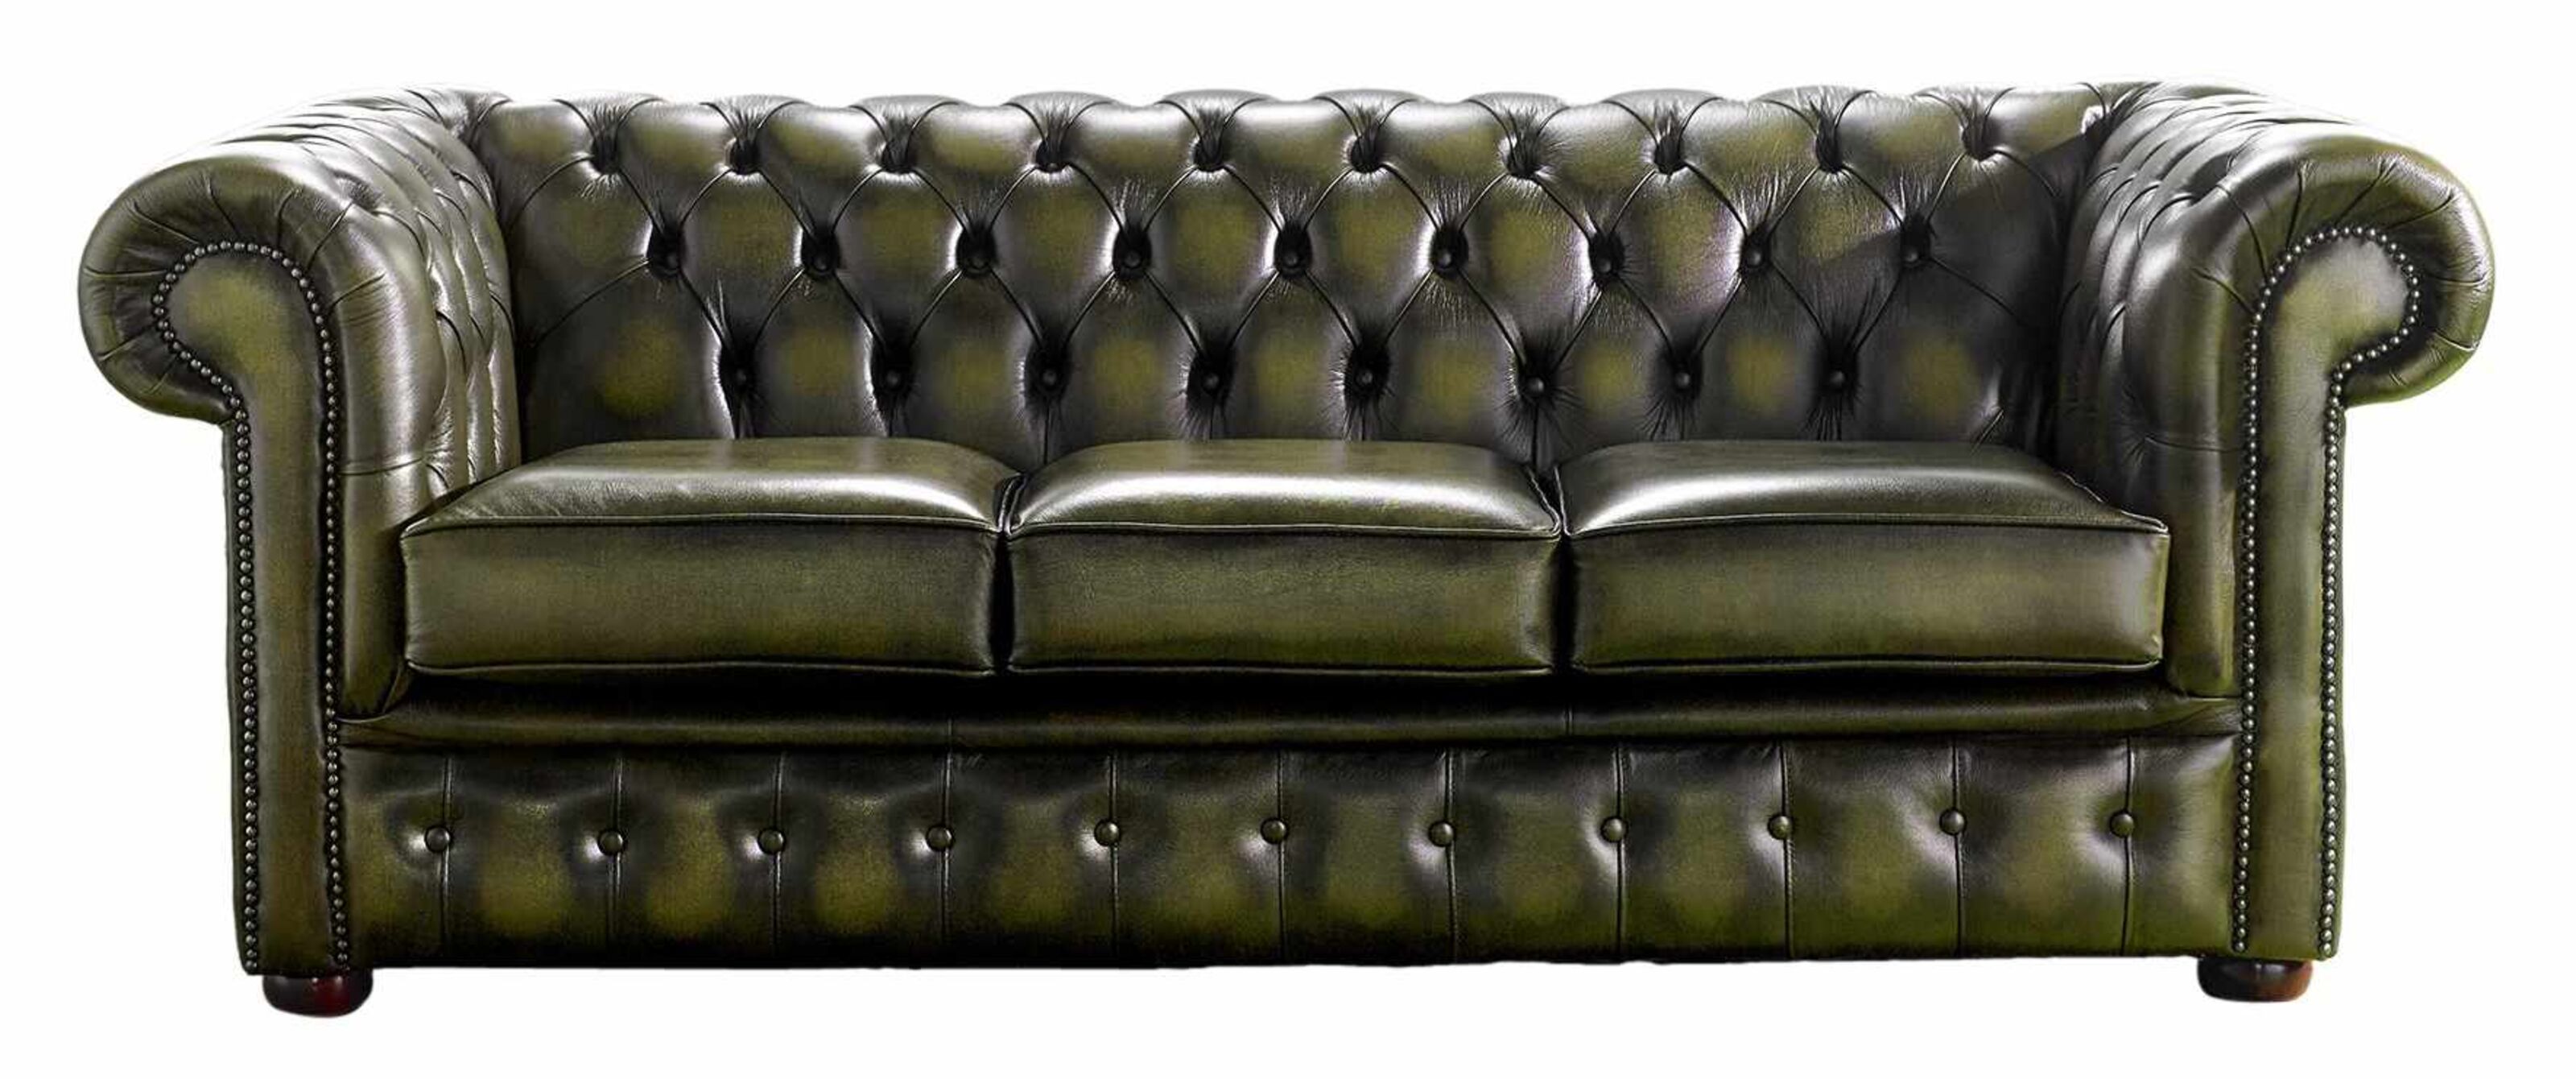 The Priced Prestige Unraveling the Value of Chesterfield Sofas  %Post Title